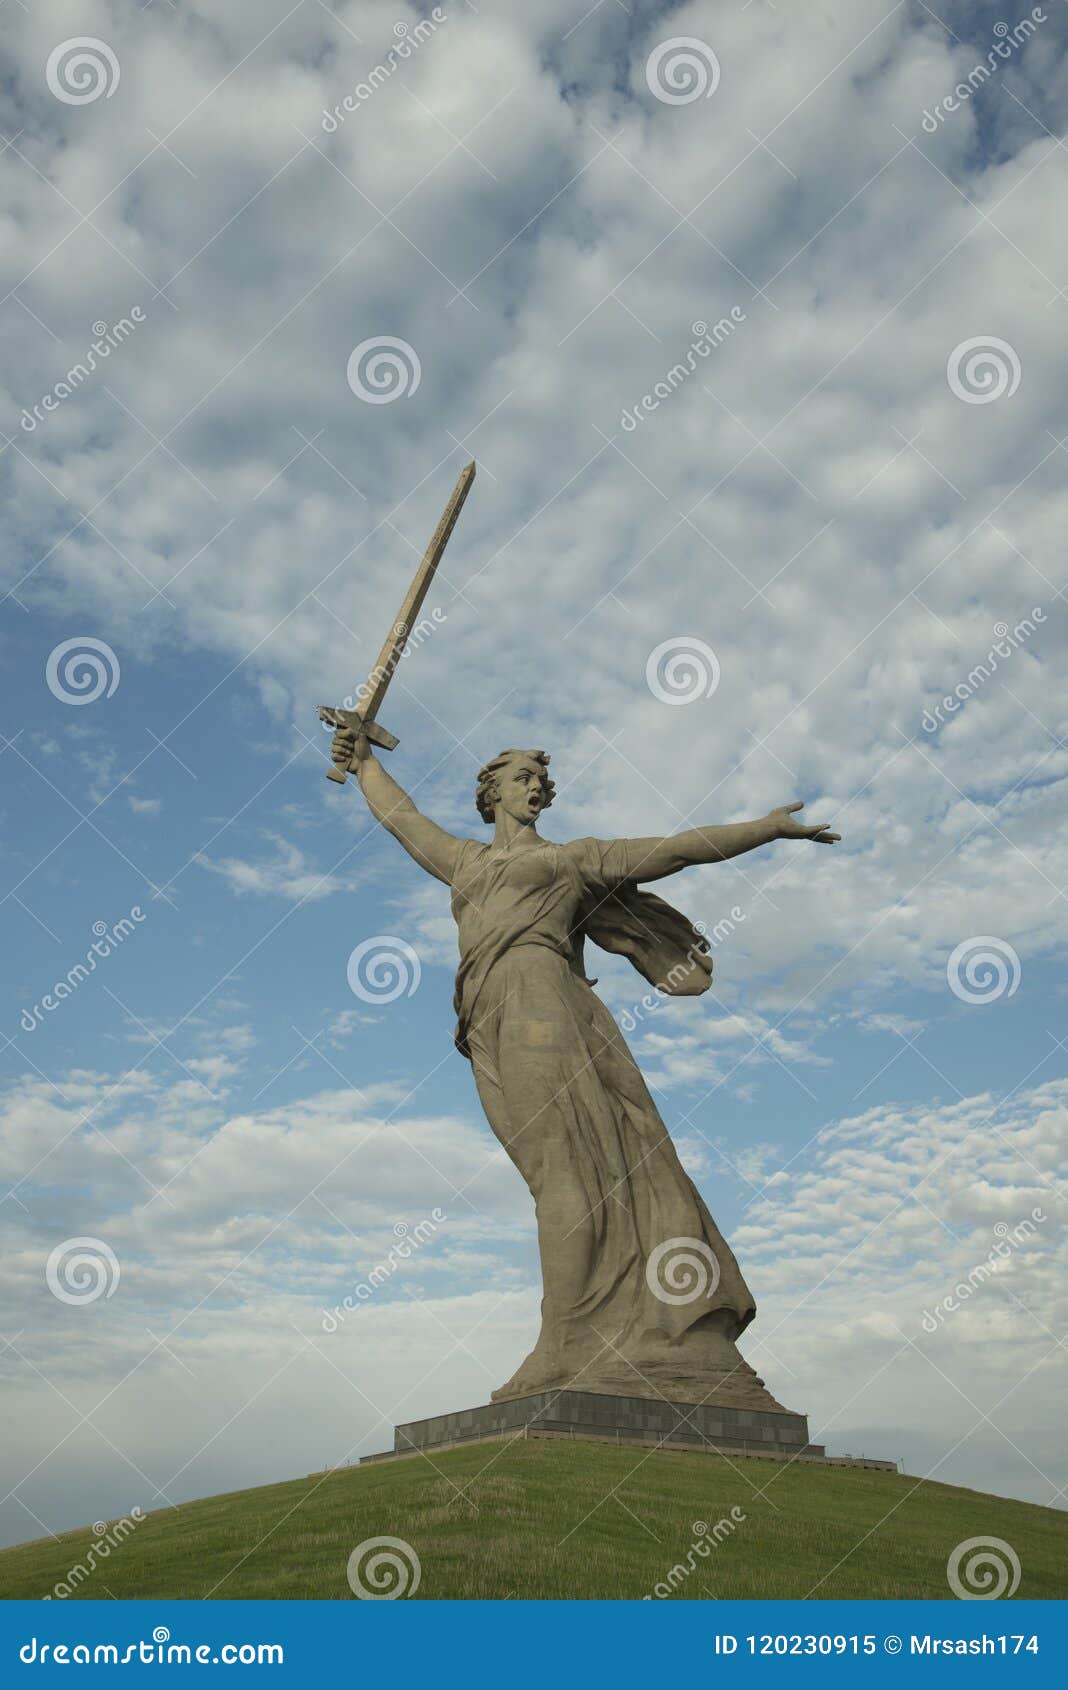 russia, volgograd - may 23, 2018: sculpture motherland - the compositional center of the monument-ensemble to the heroes